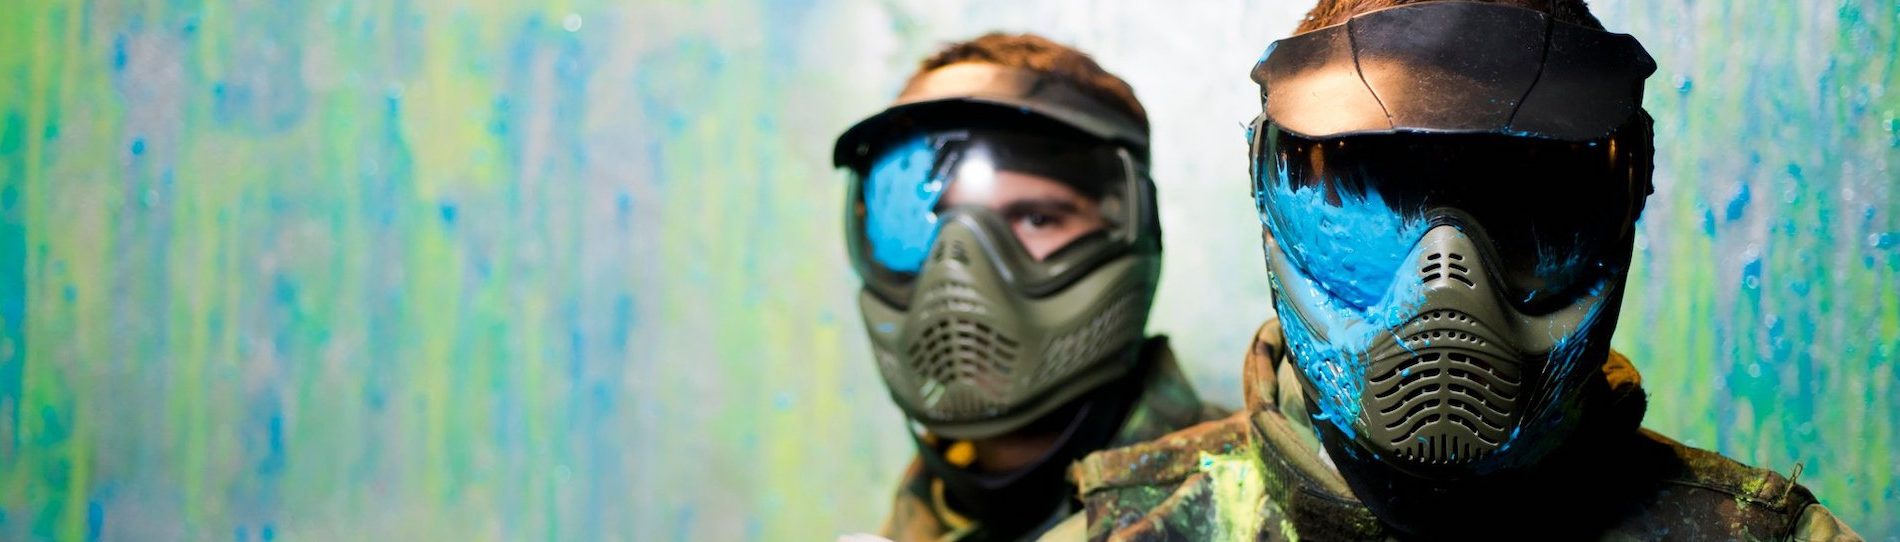 things to do in perth on the weekend like paintball